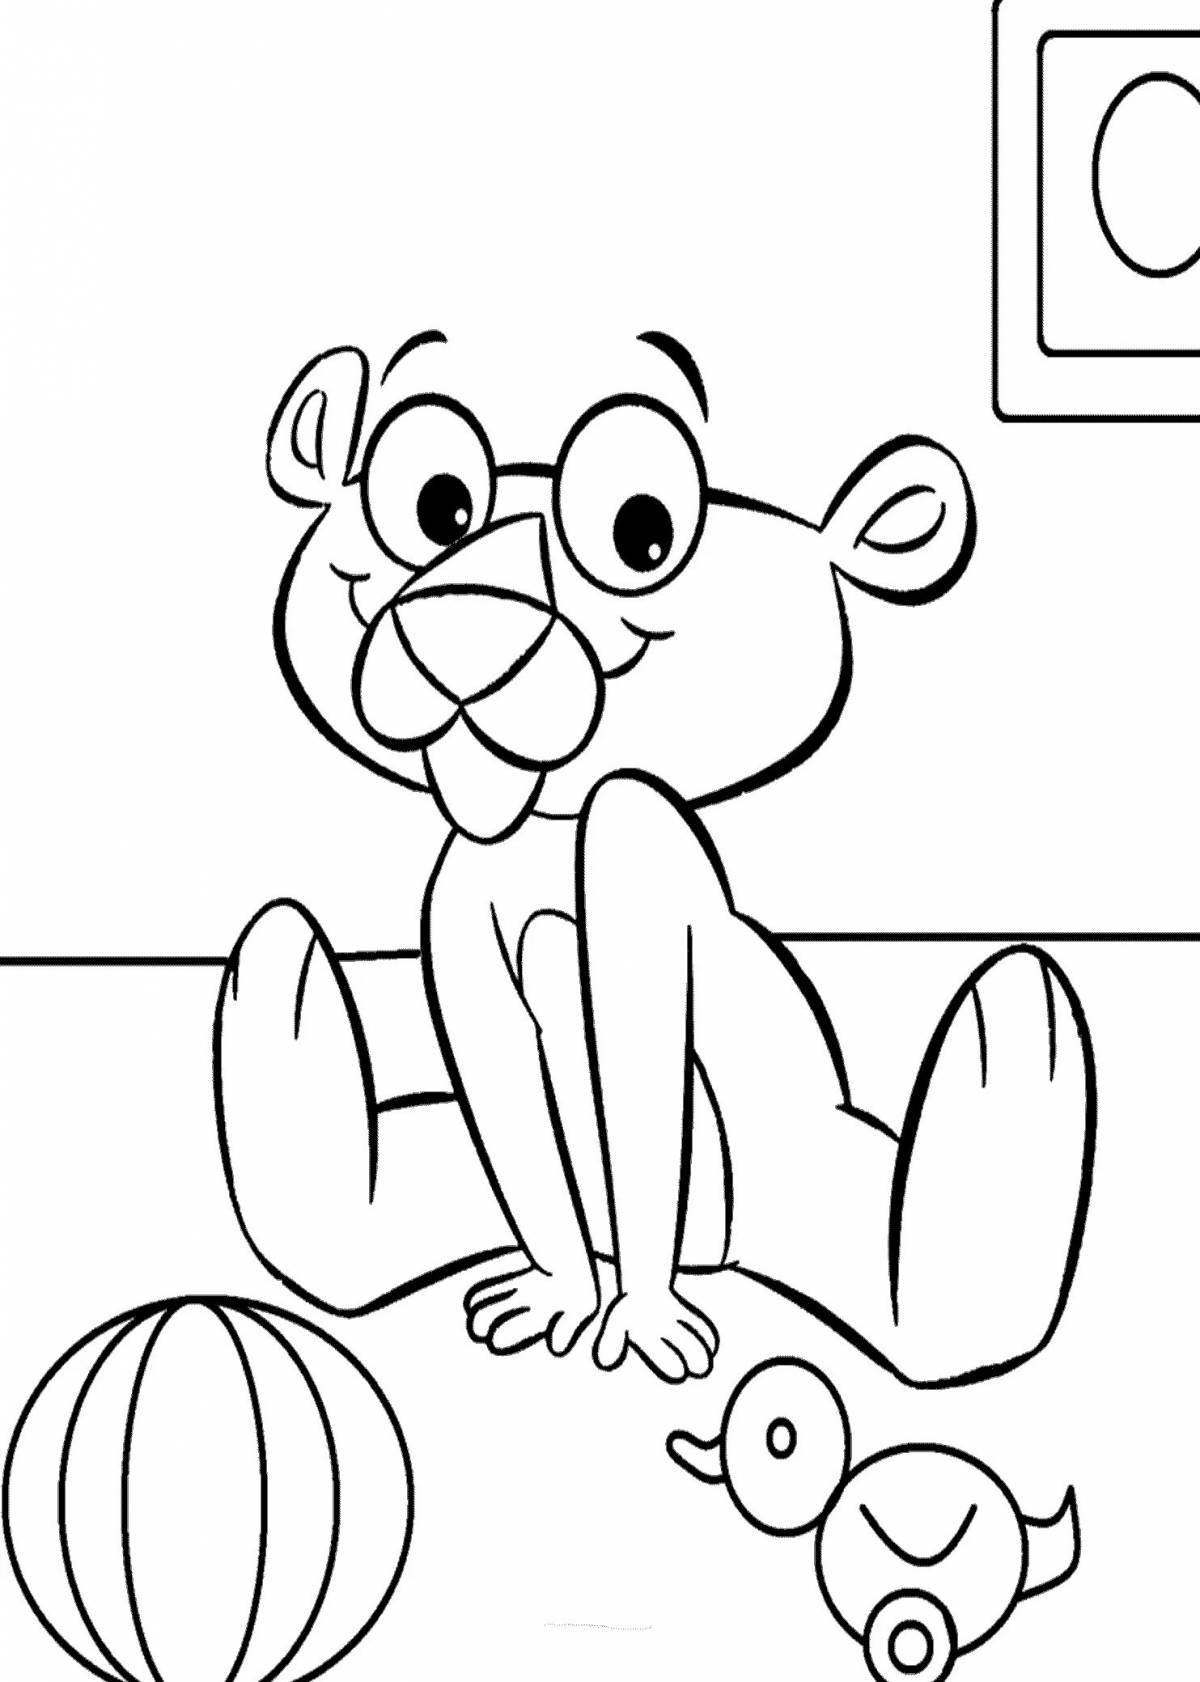 Sweet pink panther coloring page